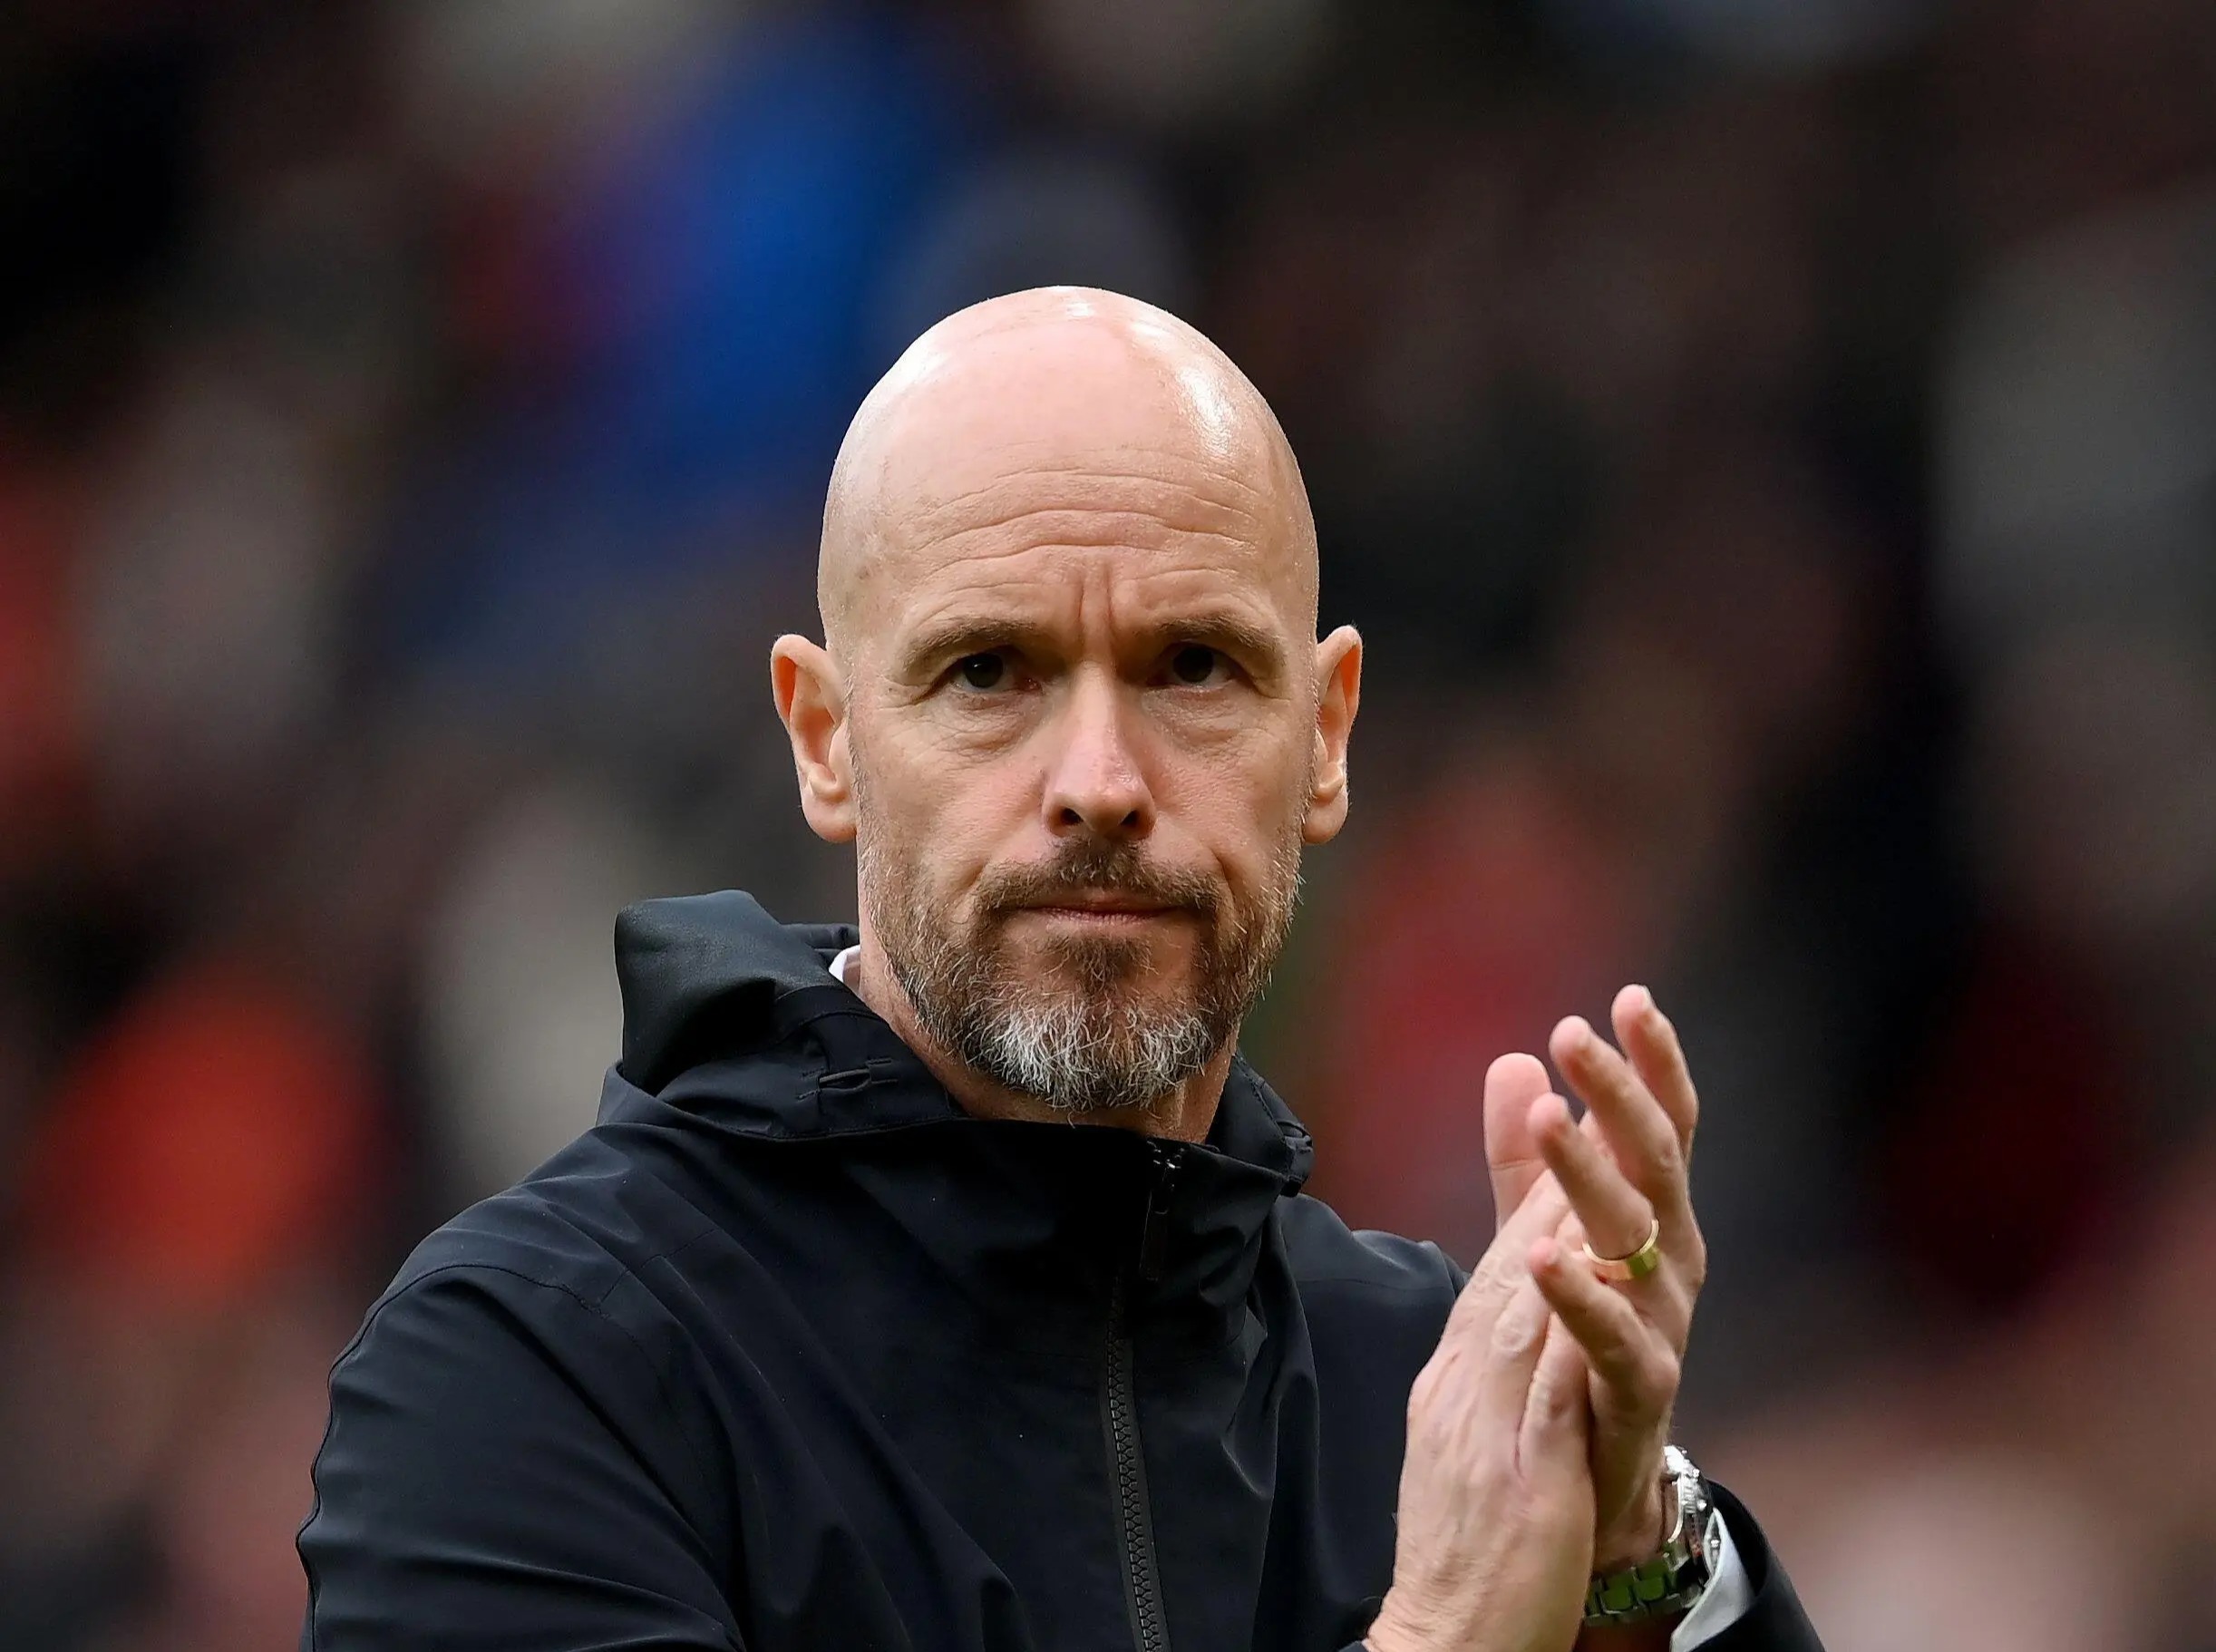 Gary Neville believes Erik ten Hag has some 'bugs' in his squad